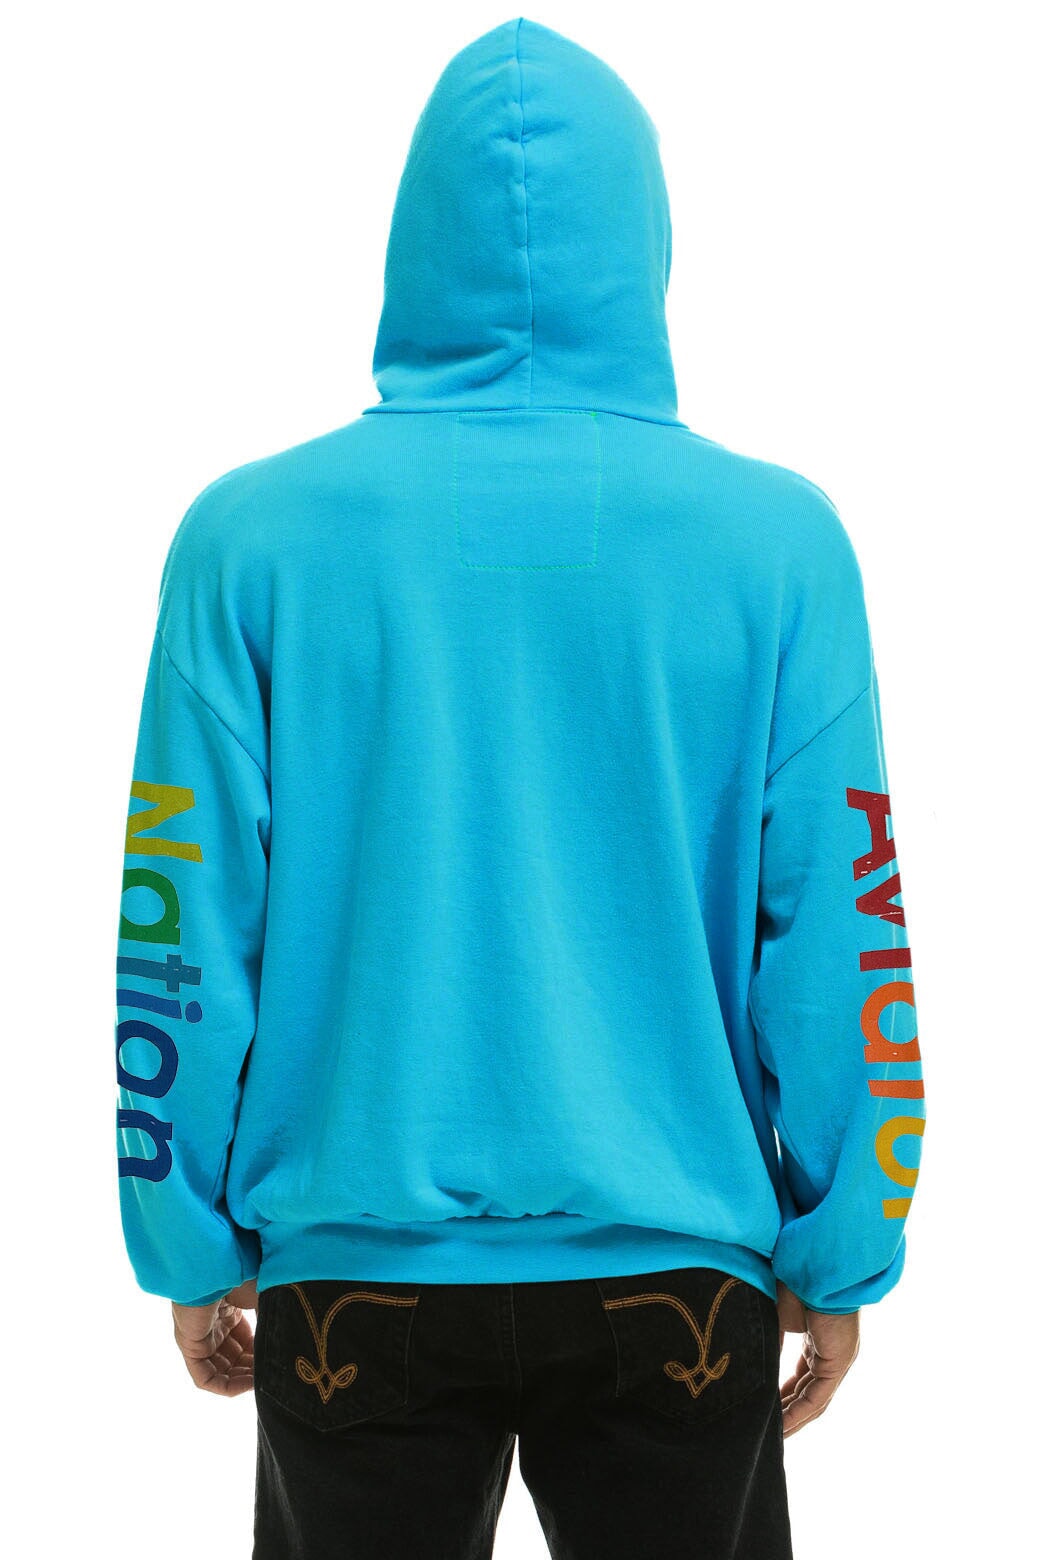 AVIATOR NATION MILL VALLEY RELAXED PULLOVER HOODIE - NEON BLUE Hoodie Aviator Nation 